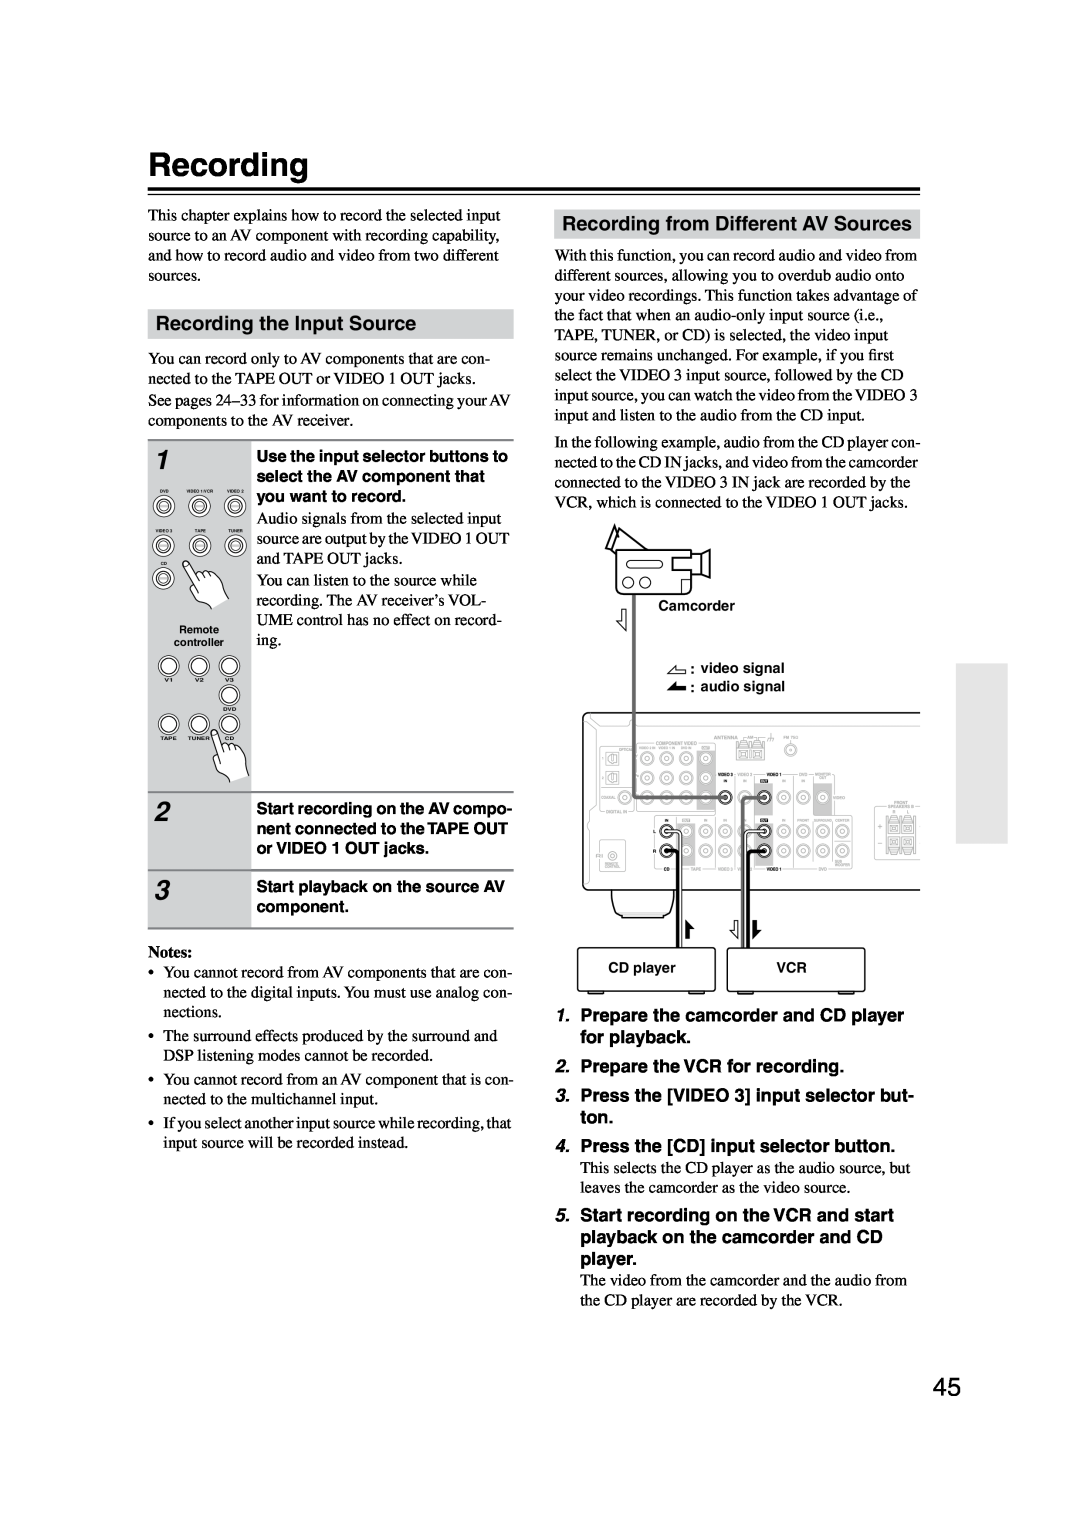 Onkyo HT-S590 instruction manual Recording the Input Source, Recording from Different AV Sources 